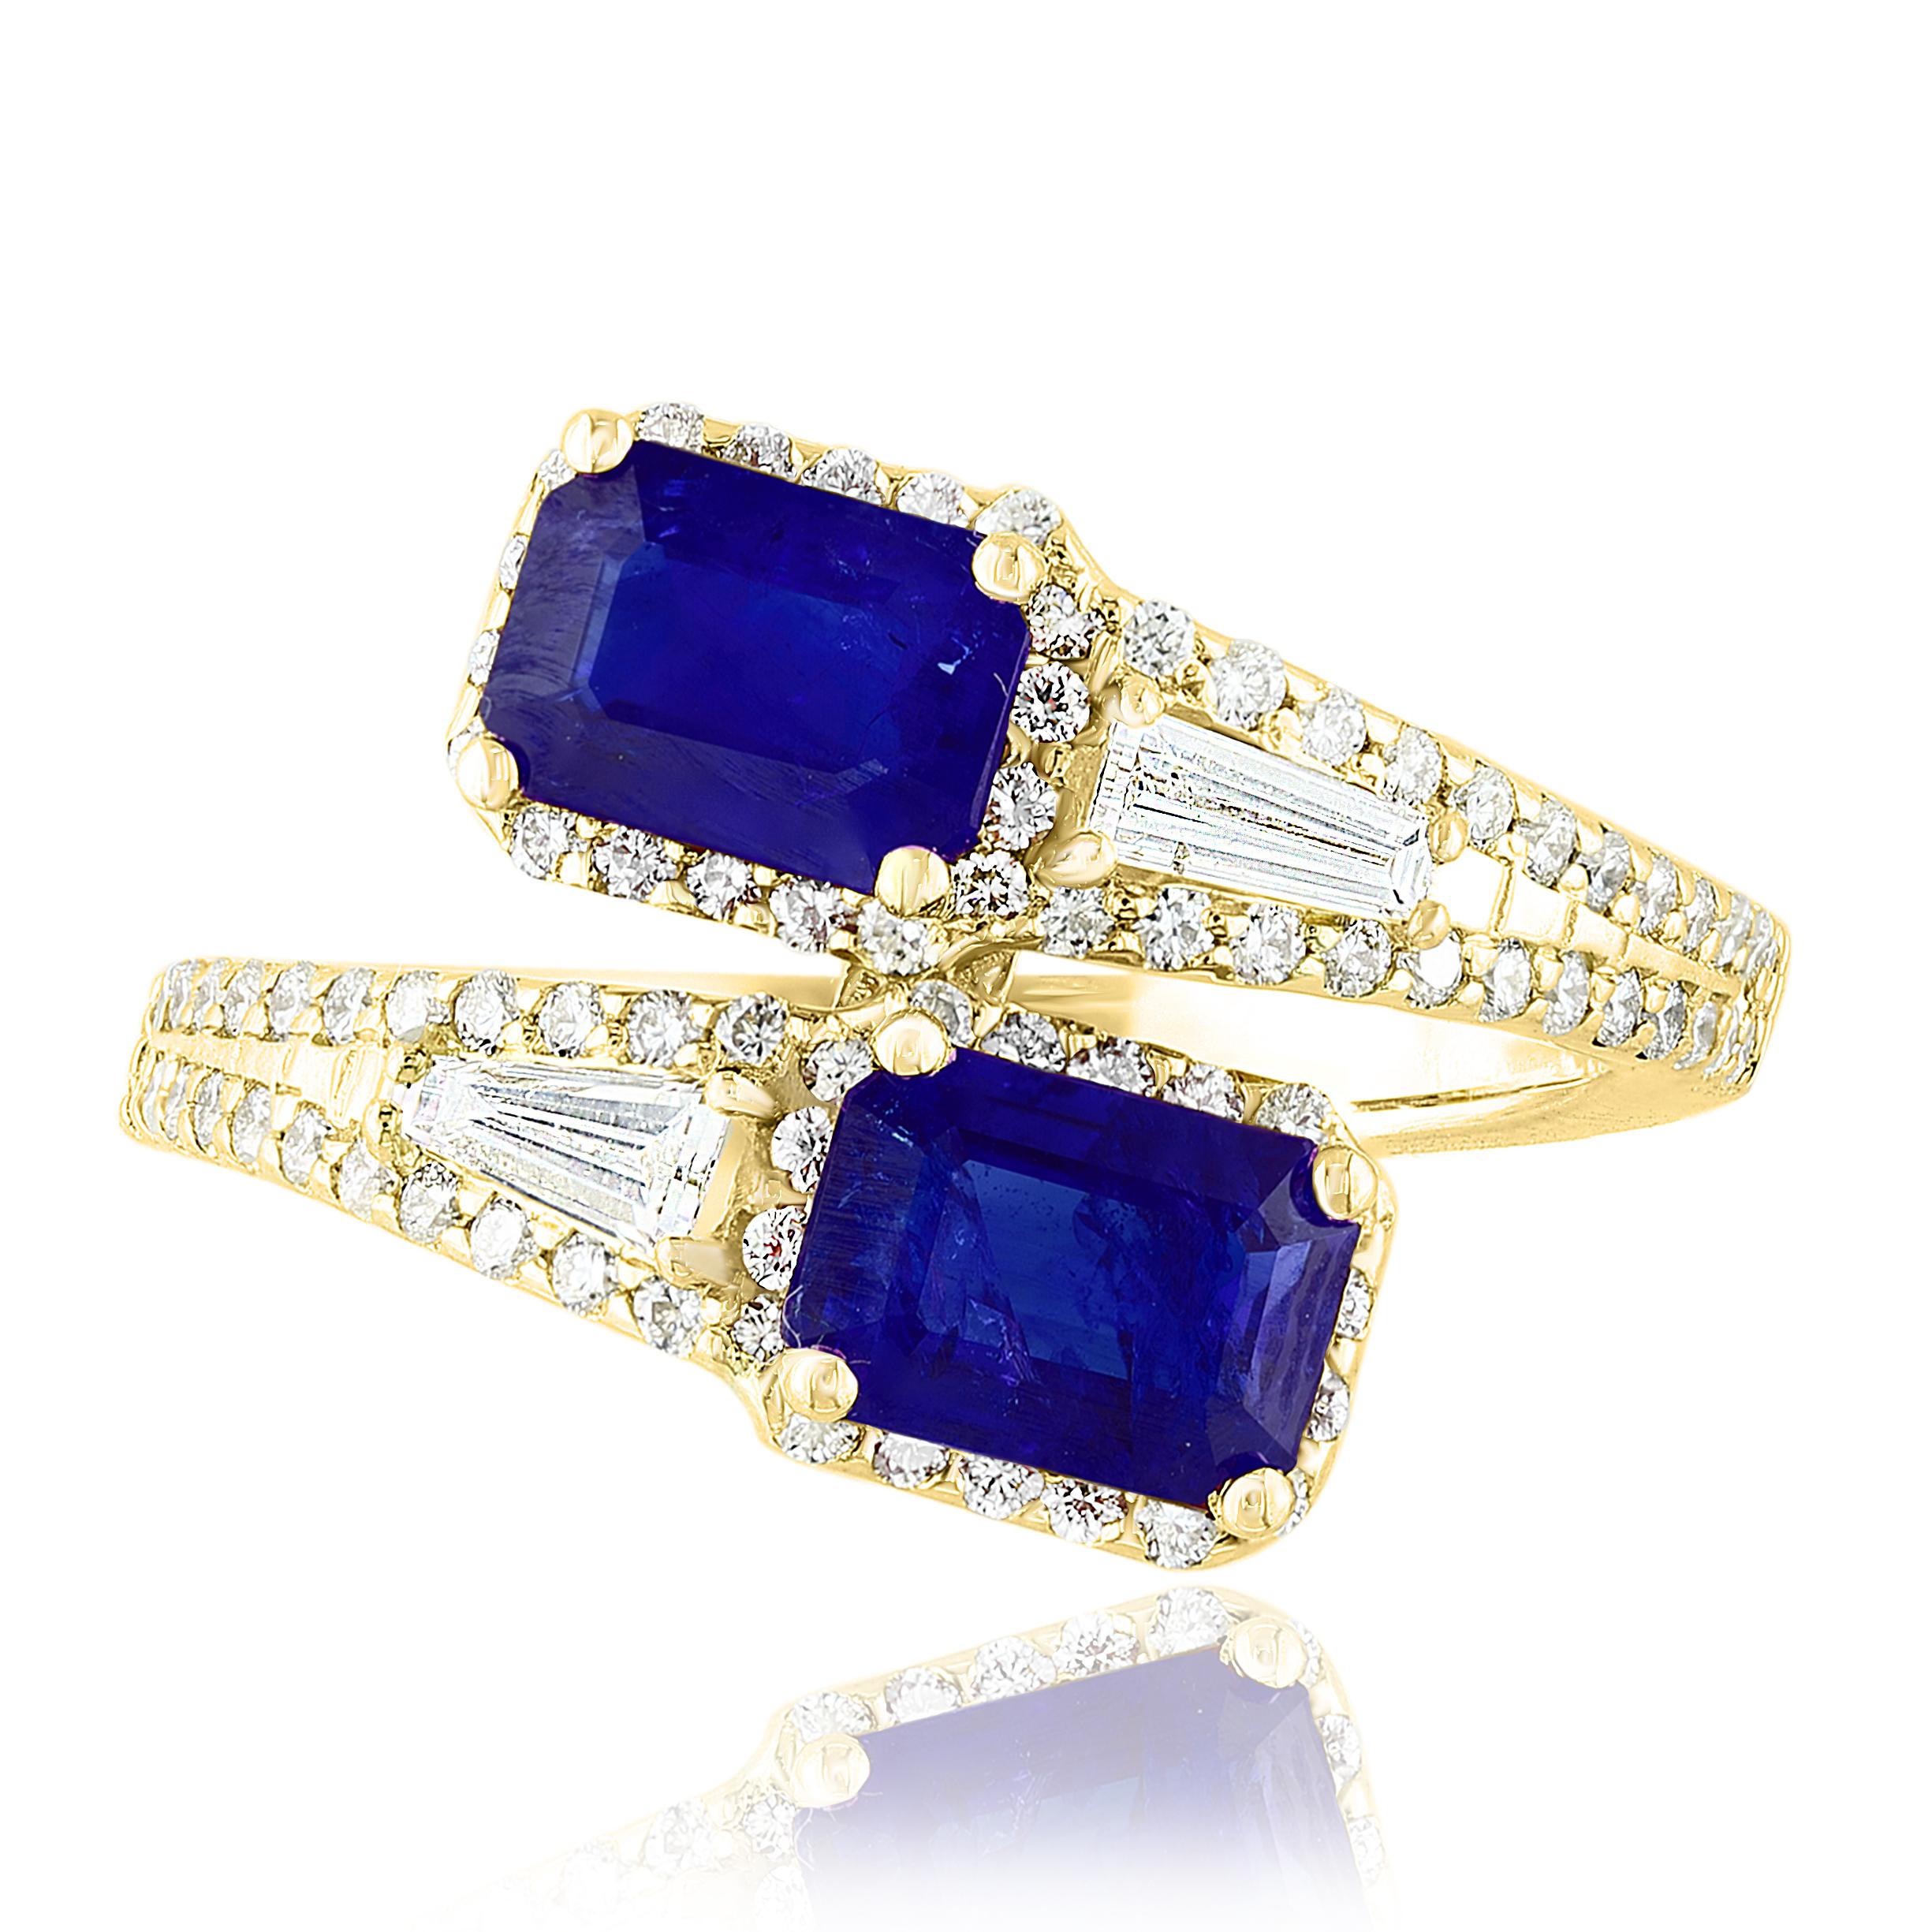 The stunning forever-together Toi et Moi ring features 2 Emerald cut Sapphires embraced by east to west 2 baguette diamonds weigh and 84 round diamonds halfway to the shank. Handcrafted in 14k Yellow Gold.
2 emerald cut Sapphires in the center weigh